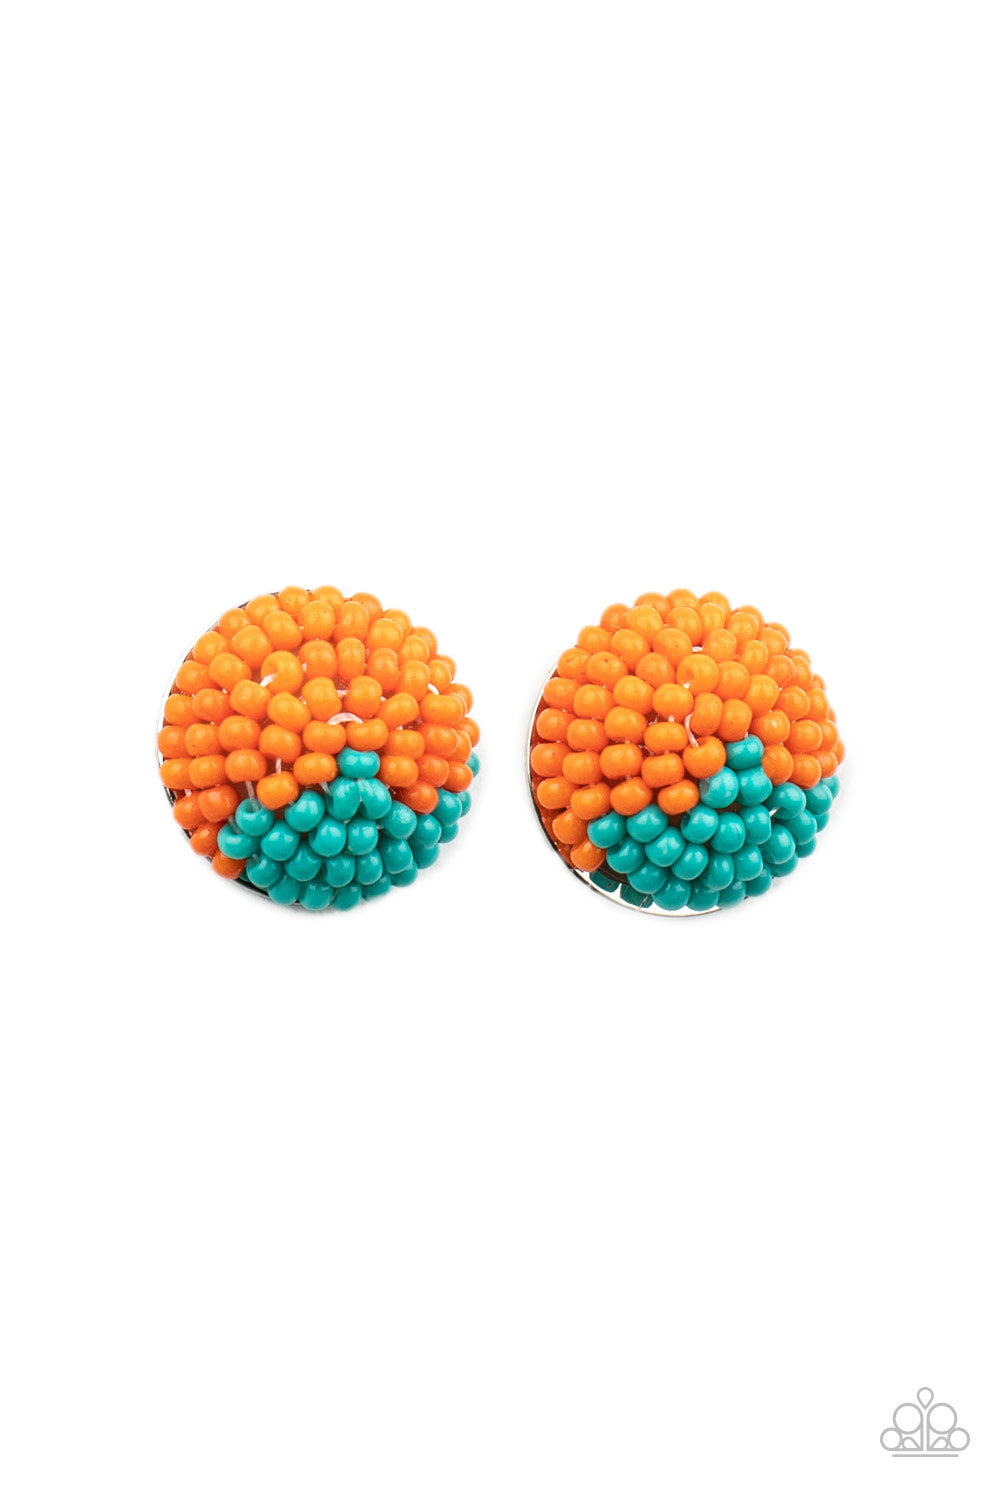 Paparazzi - A dainty collection of Amberglow and turquoise seed beads embellished the front of a circular frame, creating a colorful half and half pattern. Earring attaches to a standard post fitting.